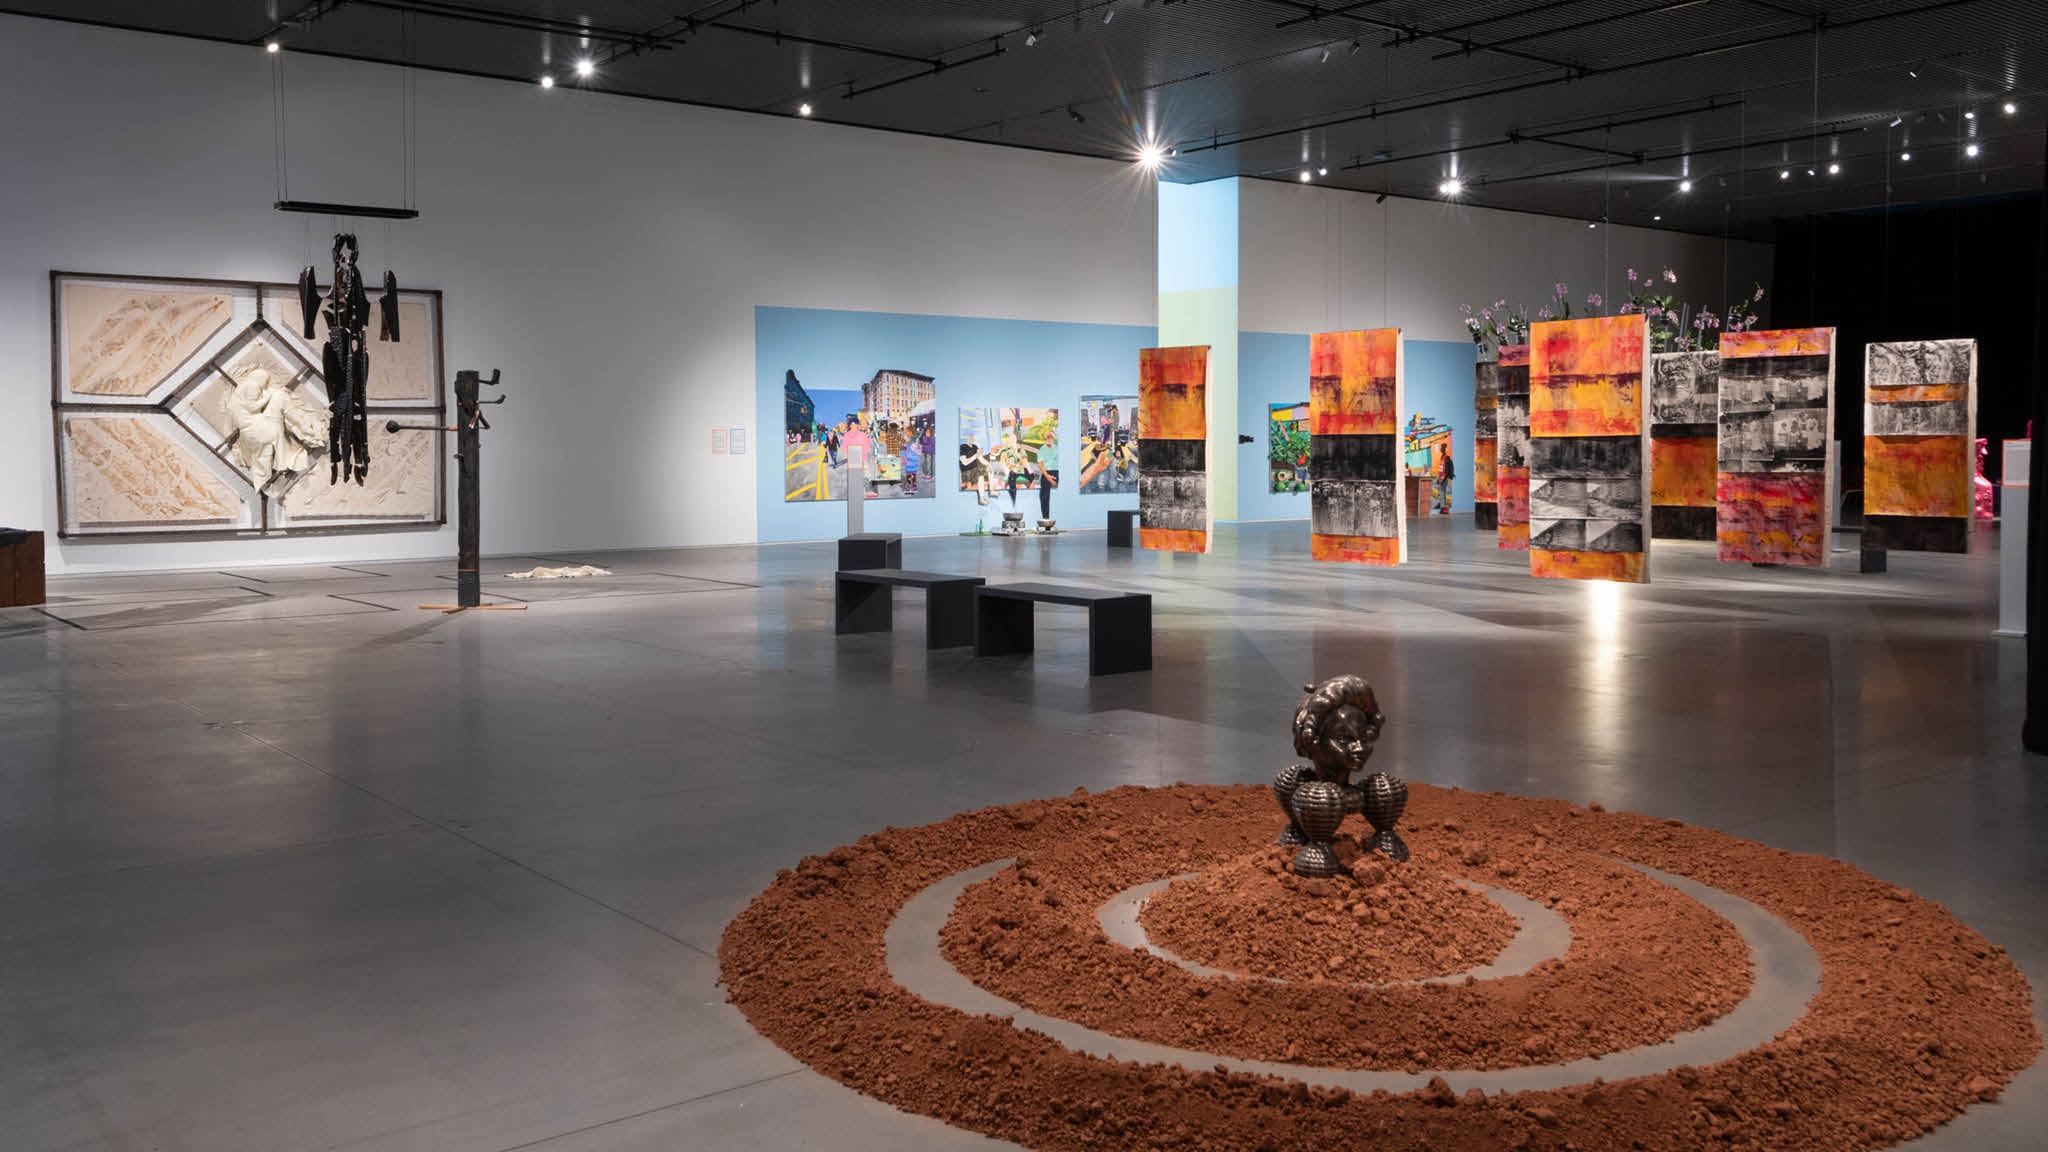 A view of an exhibition in a large art gallery without any walls. In the foreground is an artwork on the floor that consists of three concentric rings of red dirt. At the center sits a bronze sculpture inspired by the Benin Bronzes, historical artworks from Benin, present-day Nigeria. In the background are other paintings and installations. In the background are various paintings hanging from the ceiling and walls.